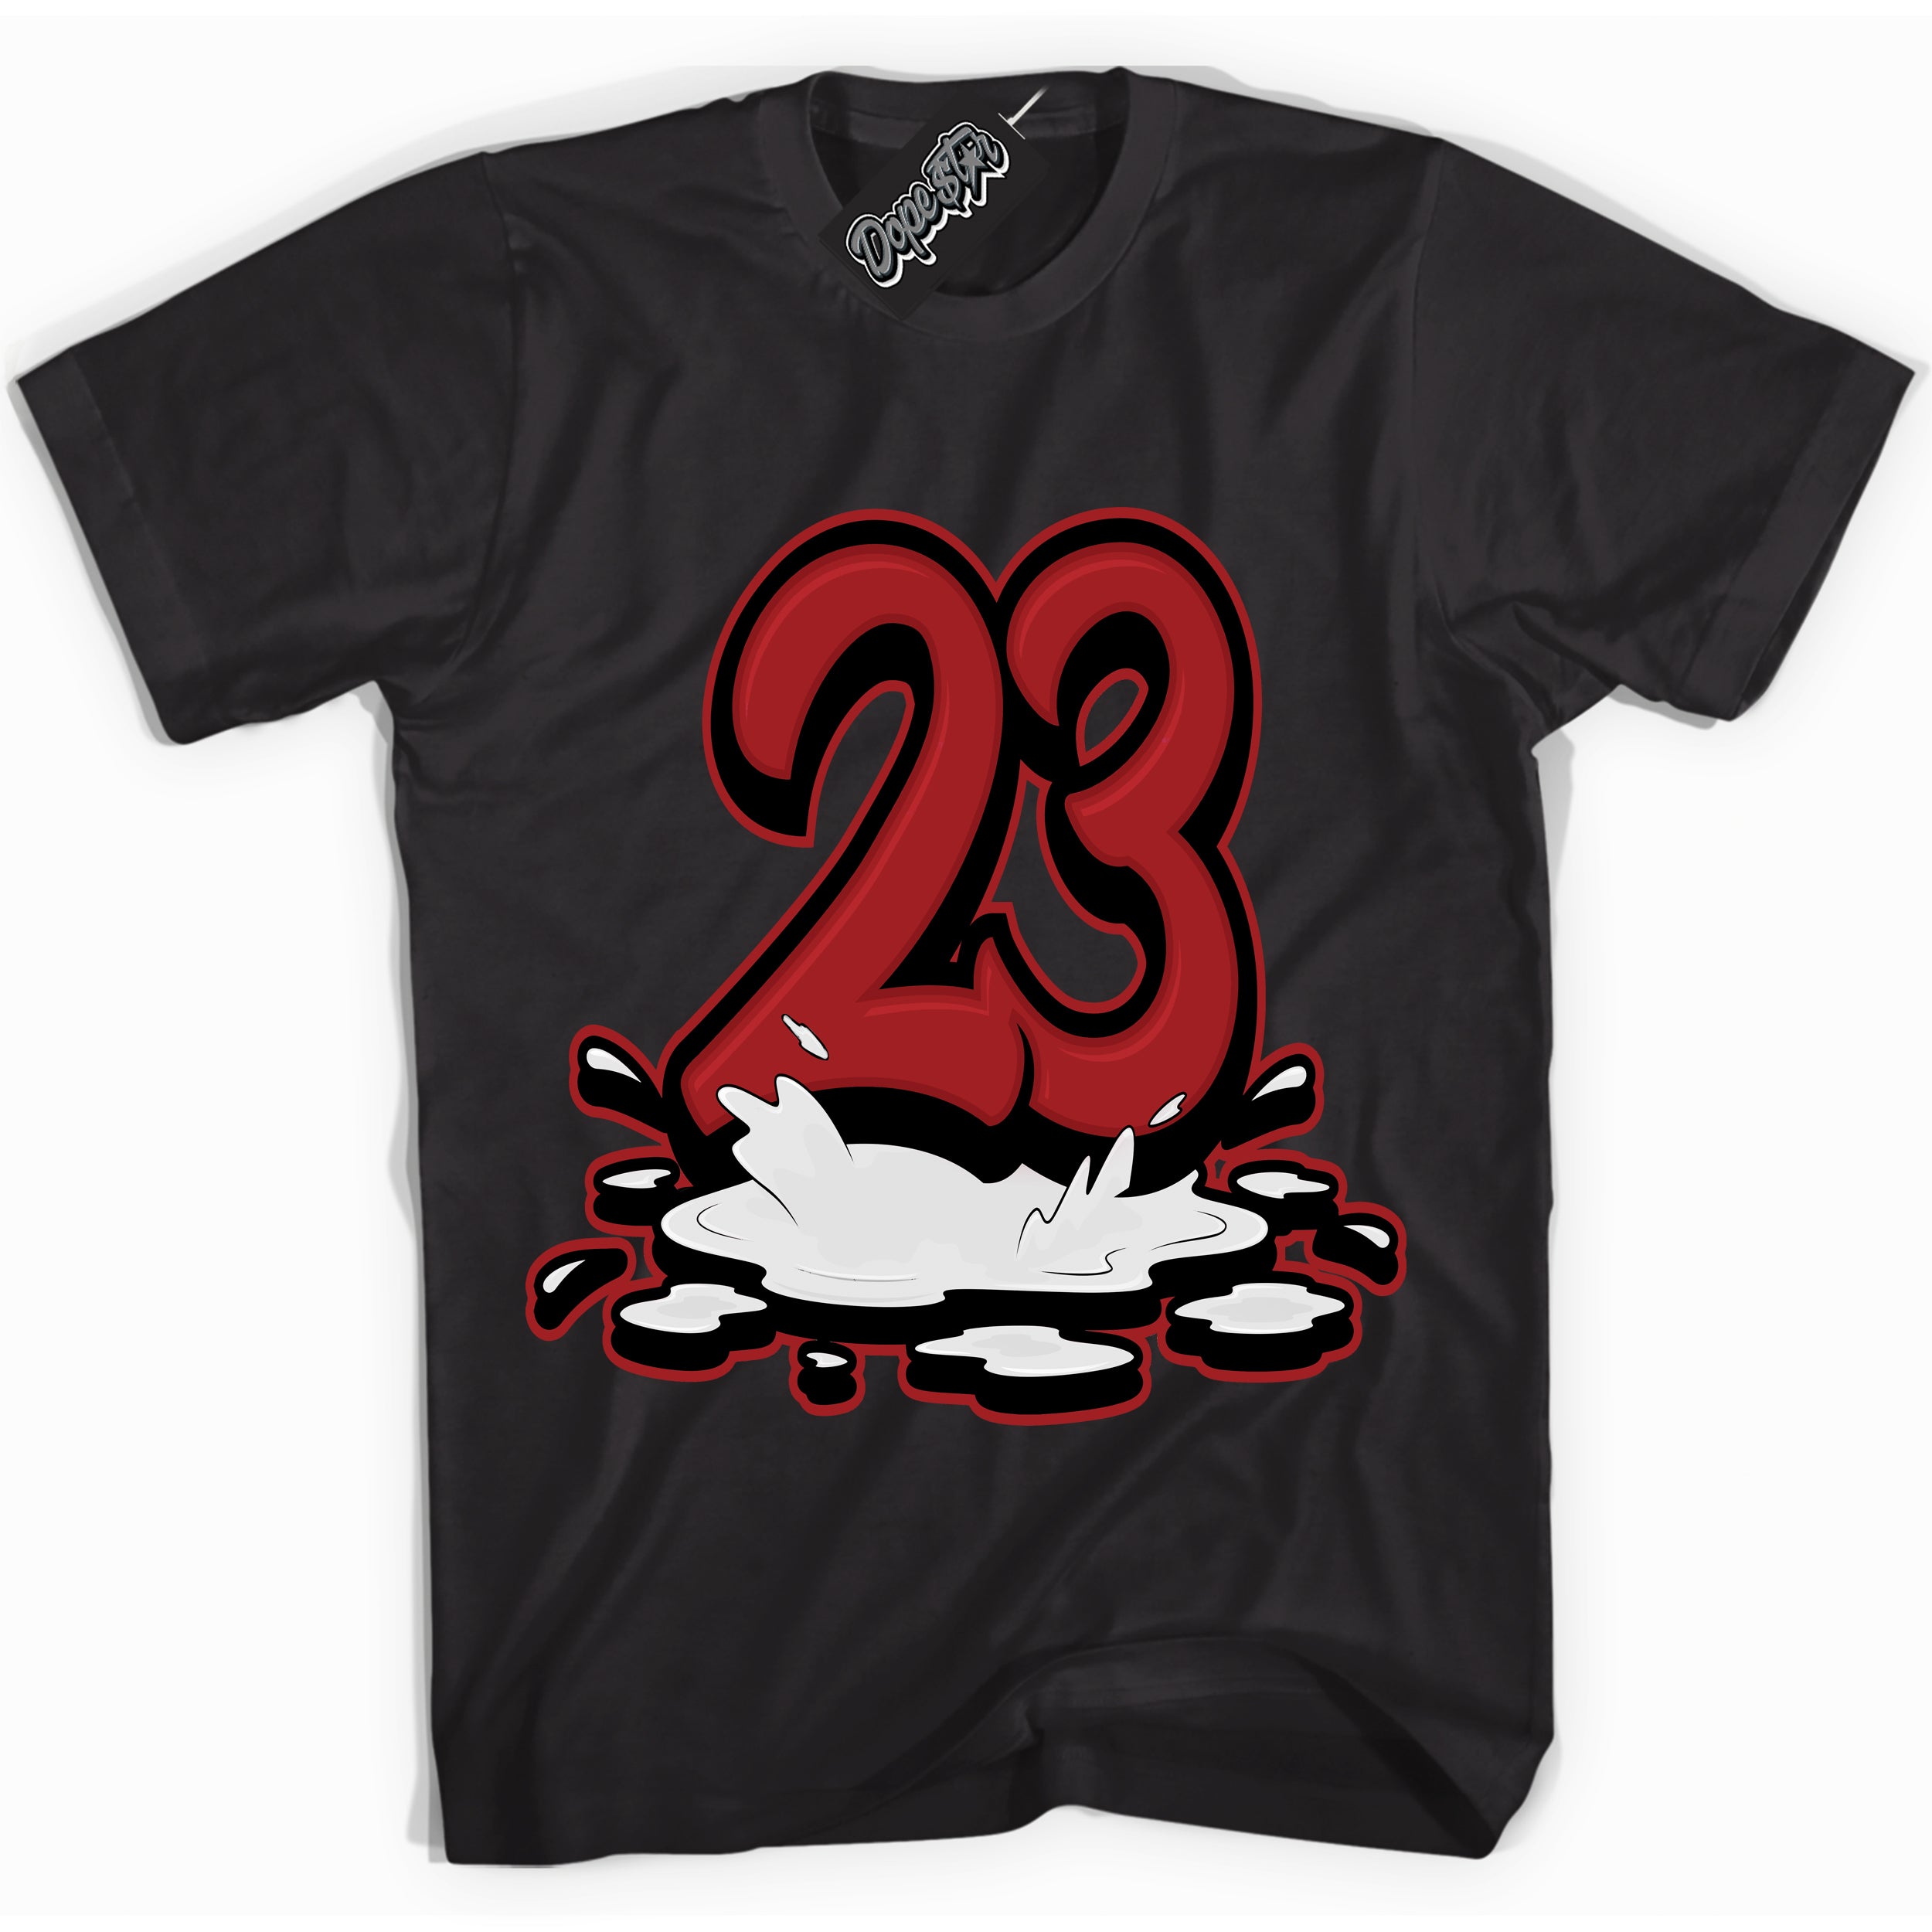 Cool Black graphic tee with “ 23 Melting ” print, that perfectly matches Lost And Found 1s sneakers 